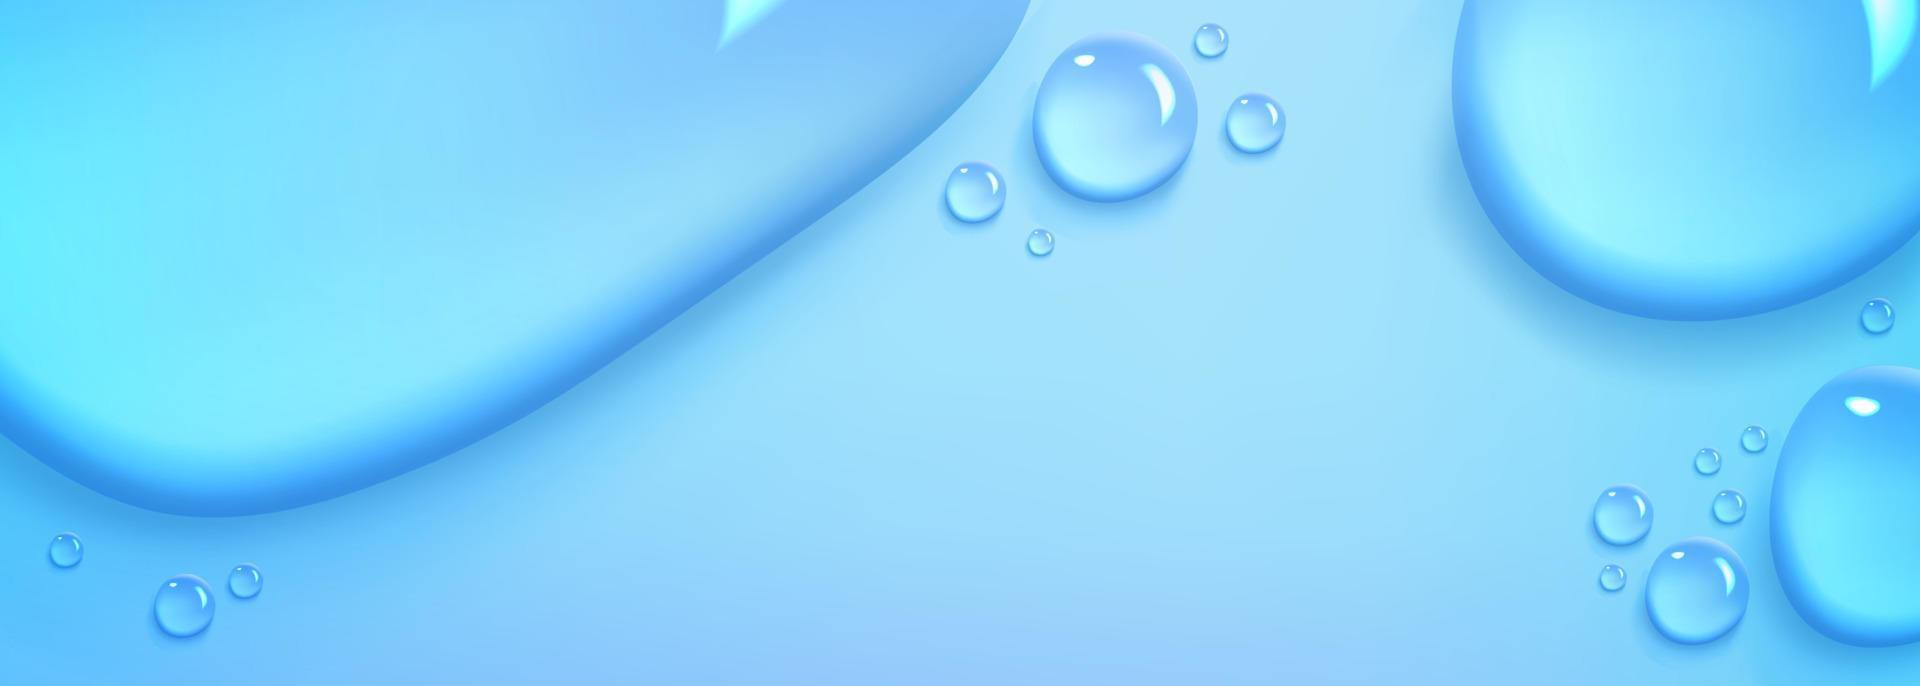 Water drops on blue background close up top view vector